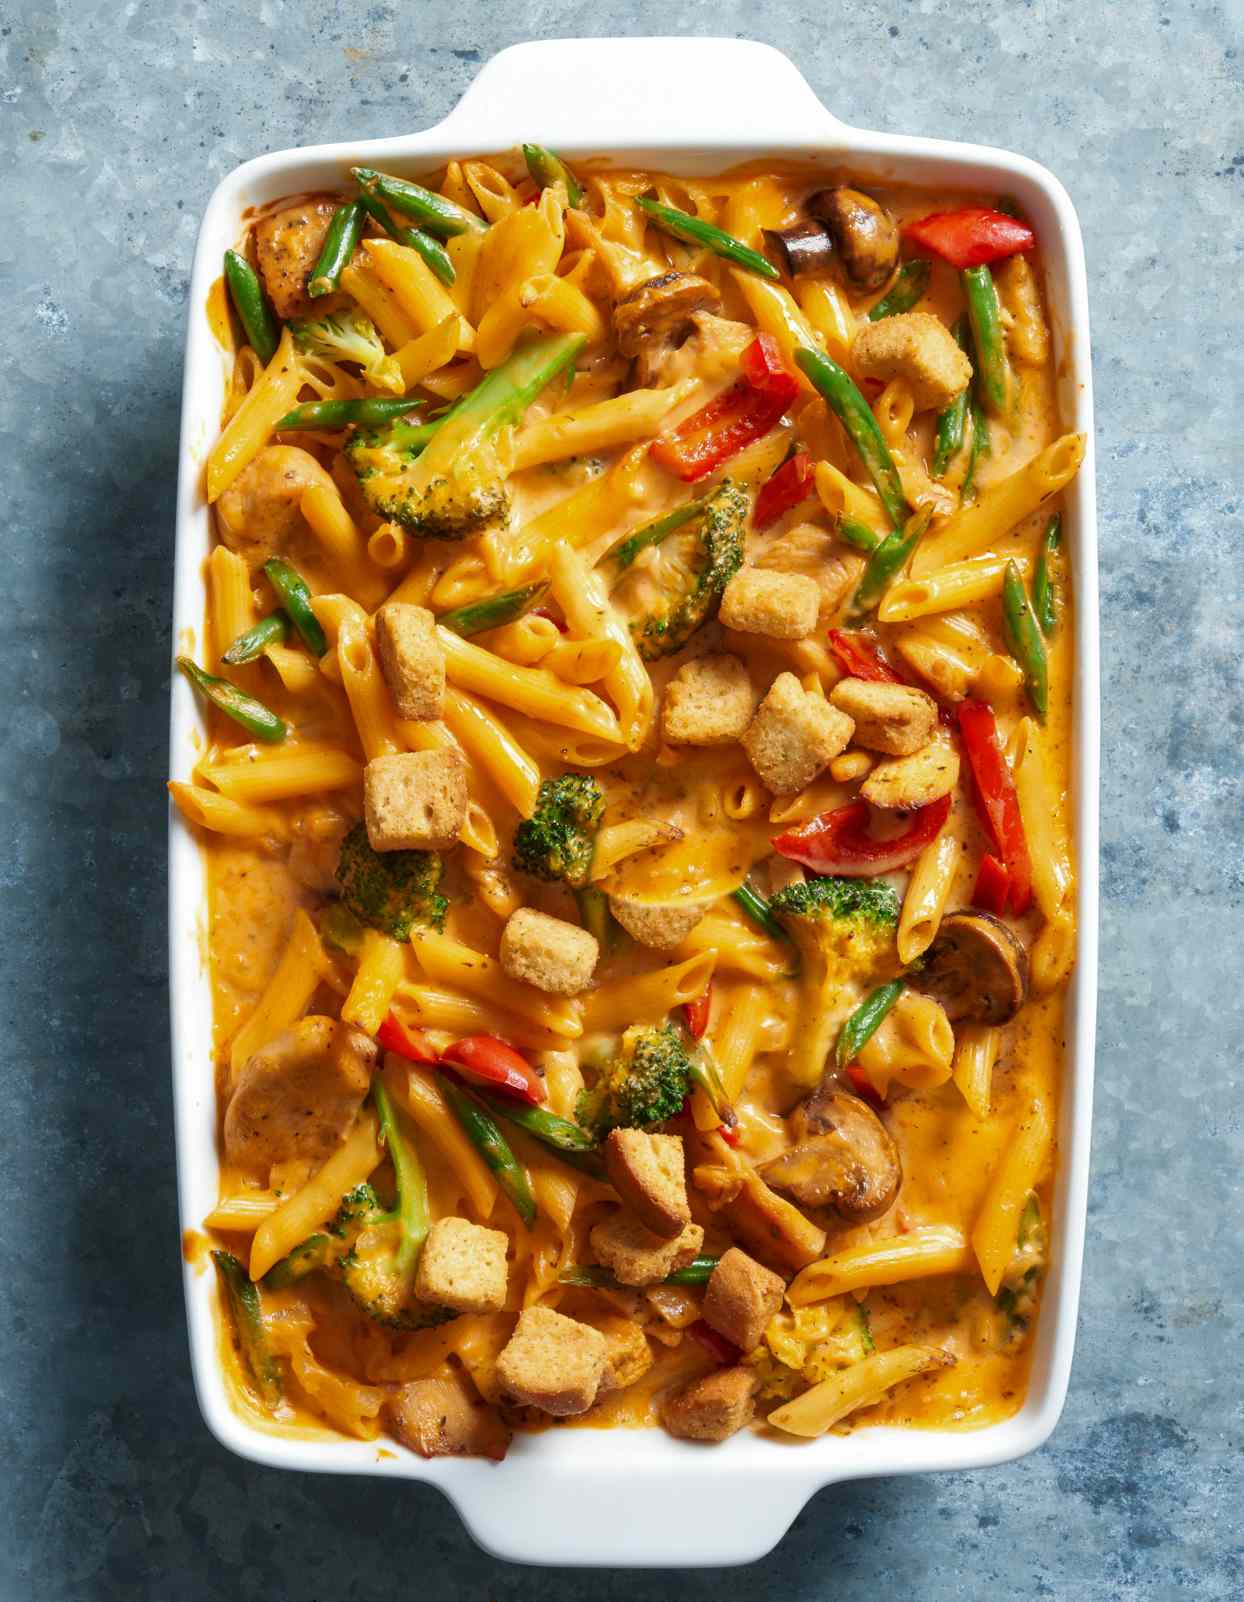 Chicken-Vegetable Mac and Cheese